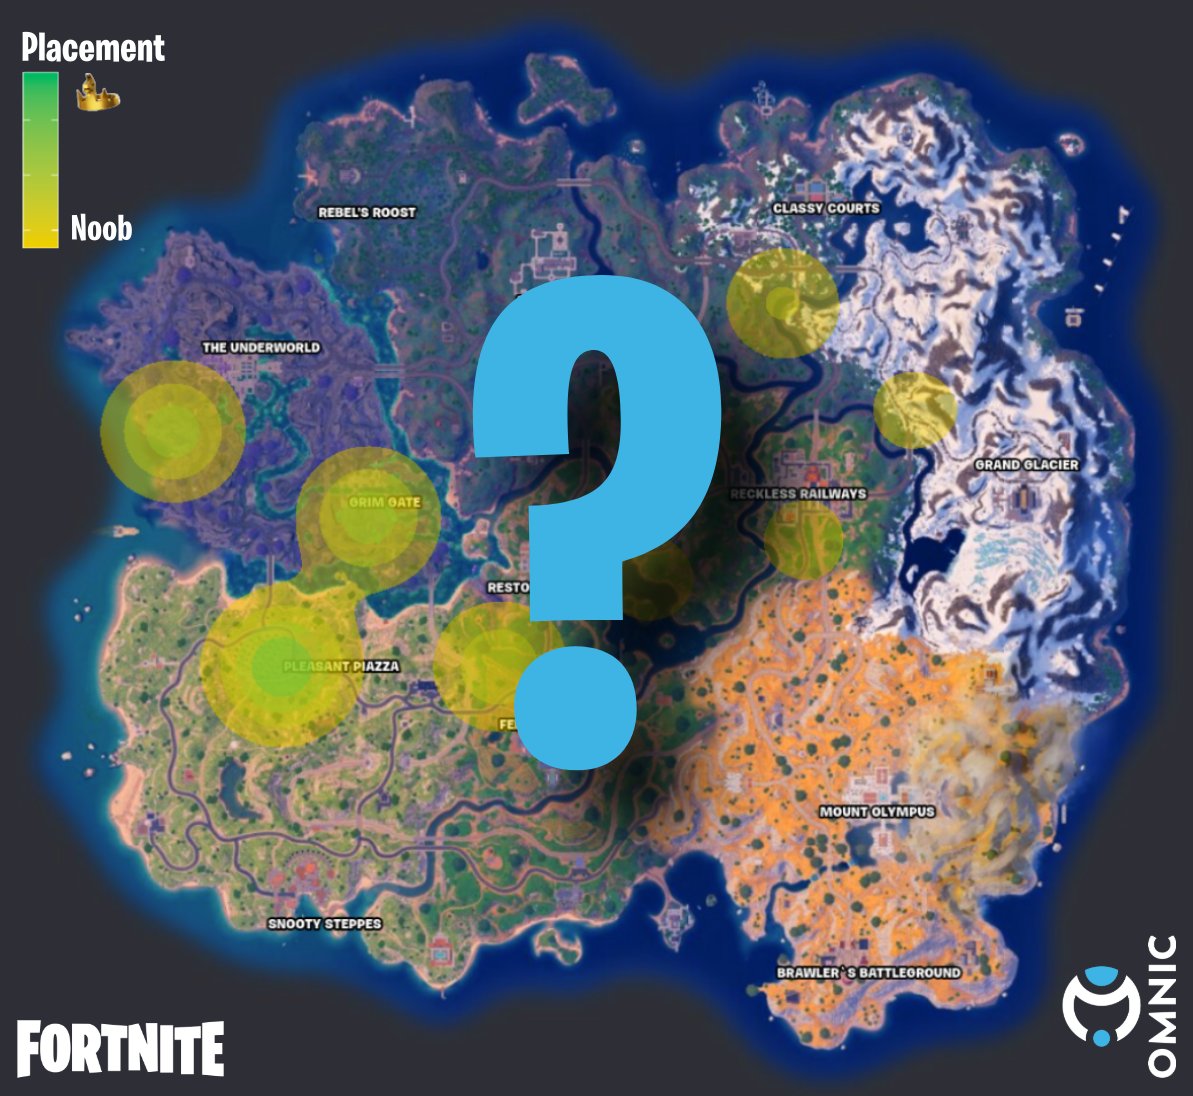 Dropping at Grim Gate got you feelin' gloomy about your placement? 👻 See how your landing spot affects your win rate in @FortniteGame with Omnic Forge's AI analysis. 🤖 👉 forge.omnic.ai #Fortnite #AI #winning